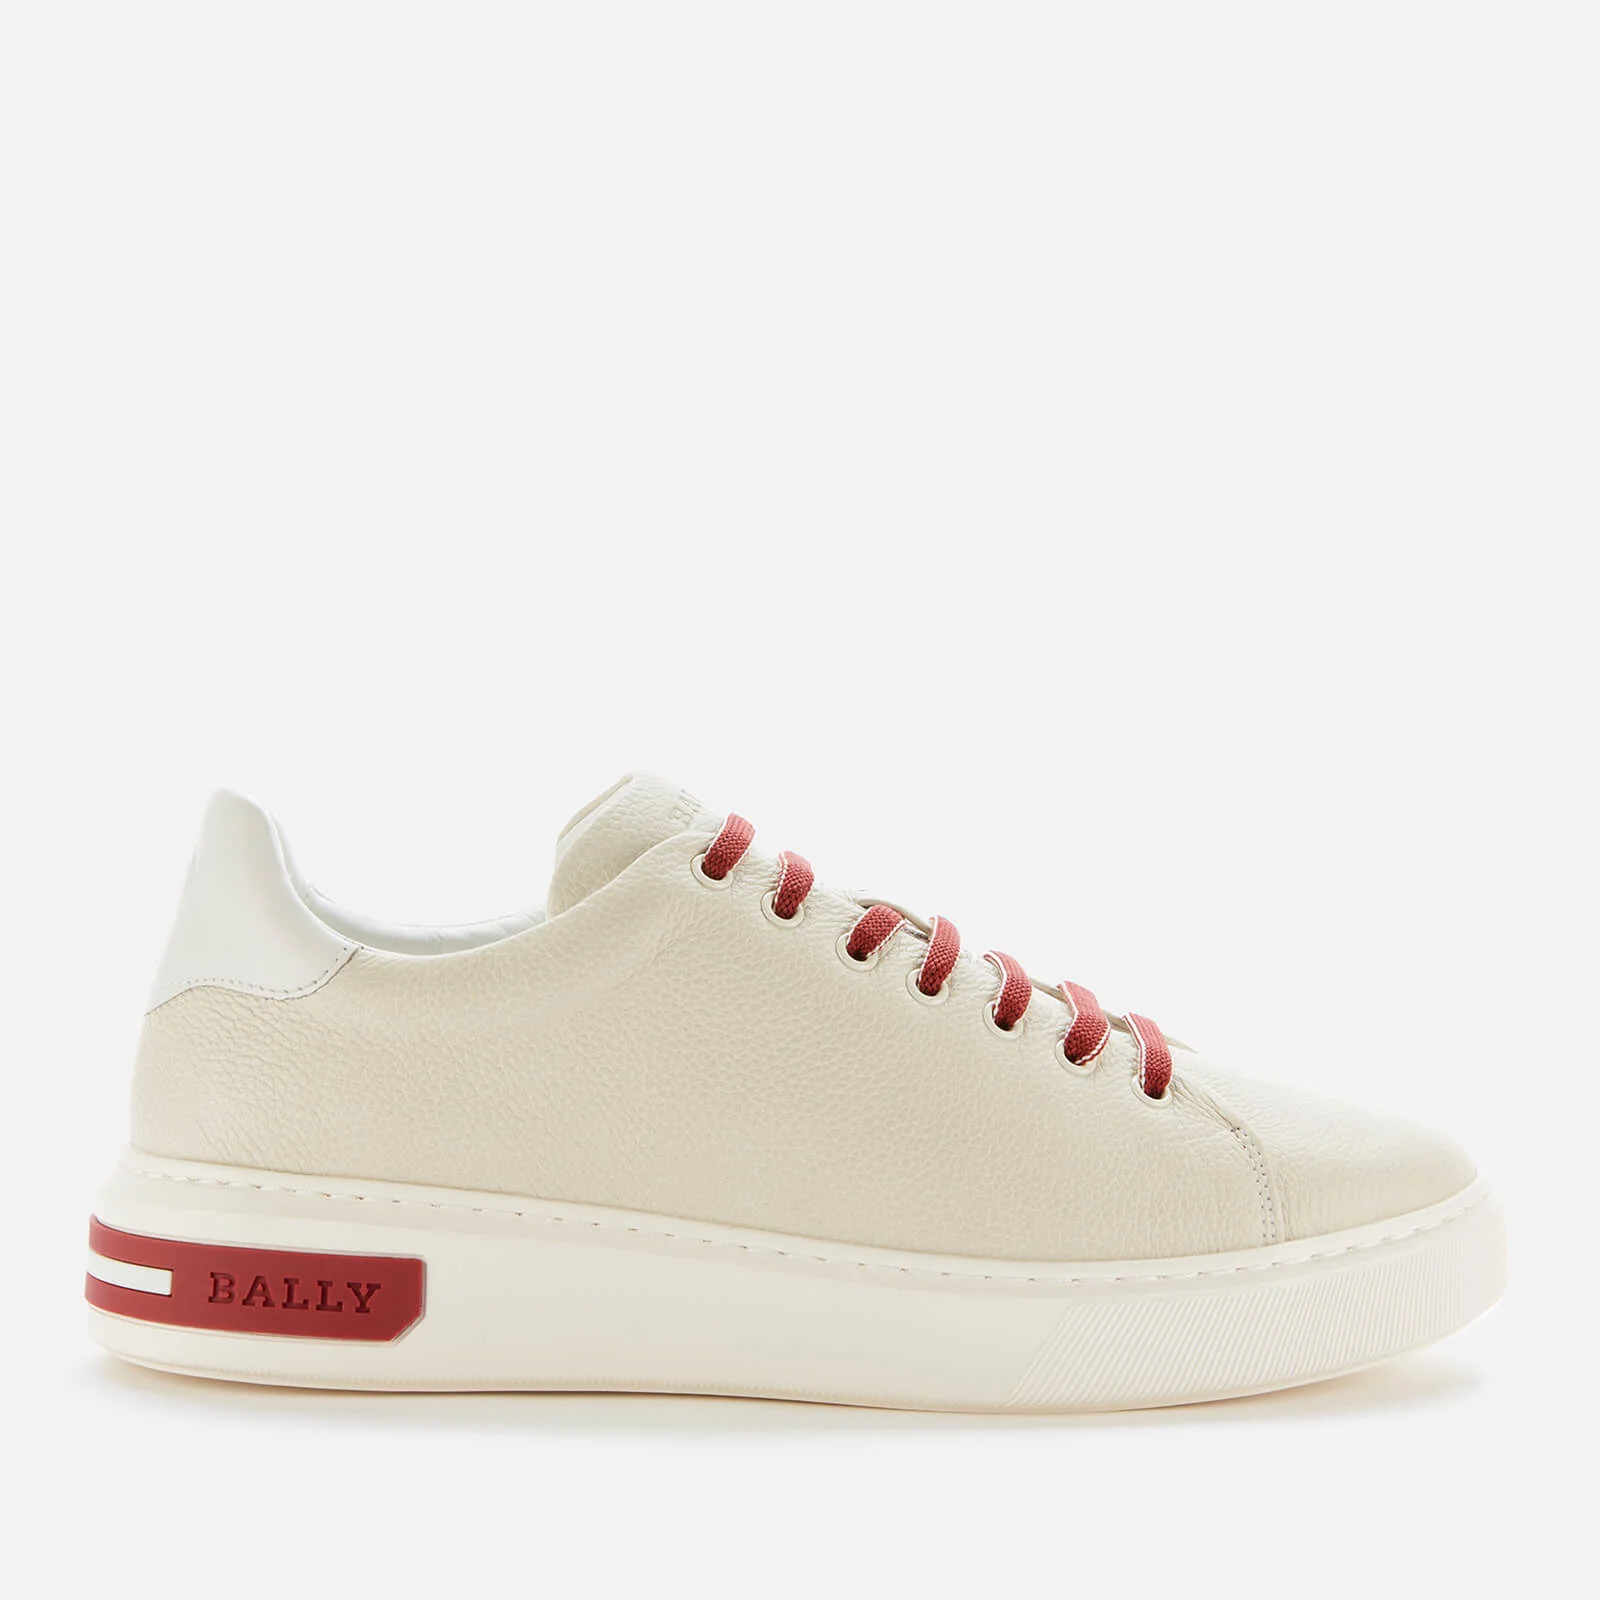 Bally Men's Marvyn Leather Trainers - White Image 1